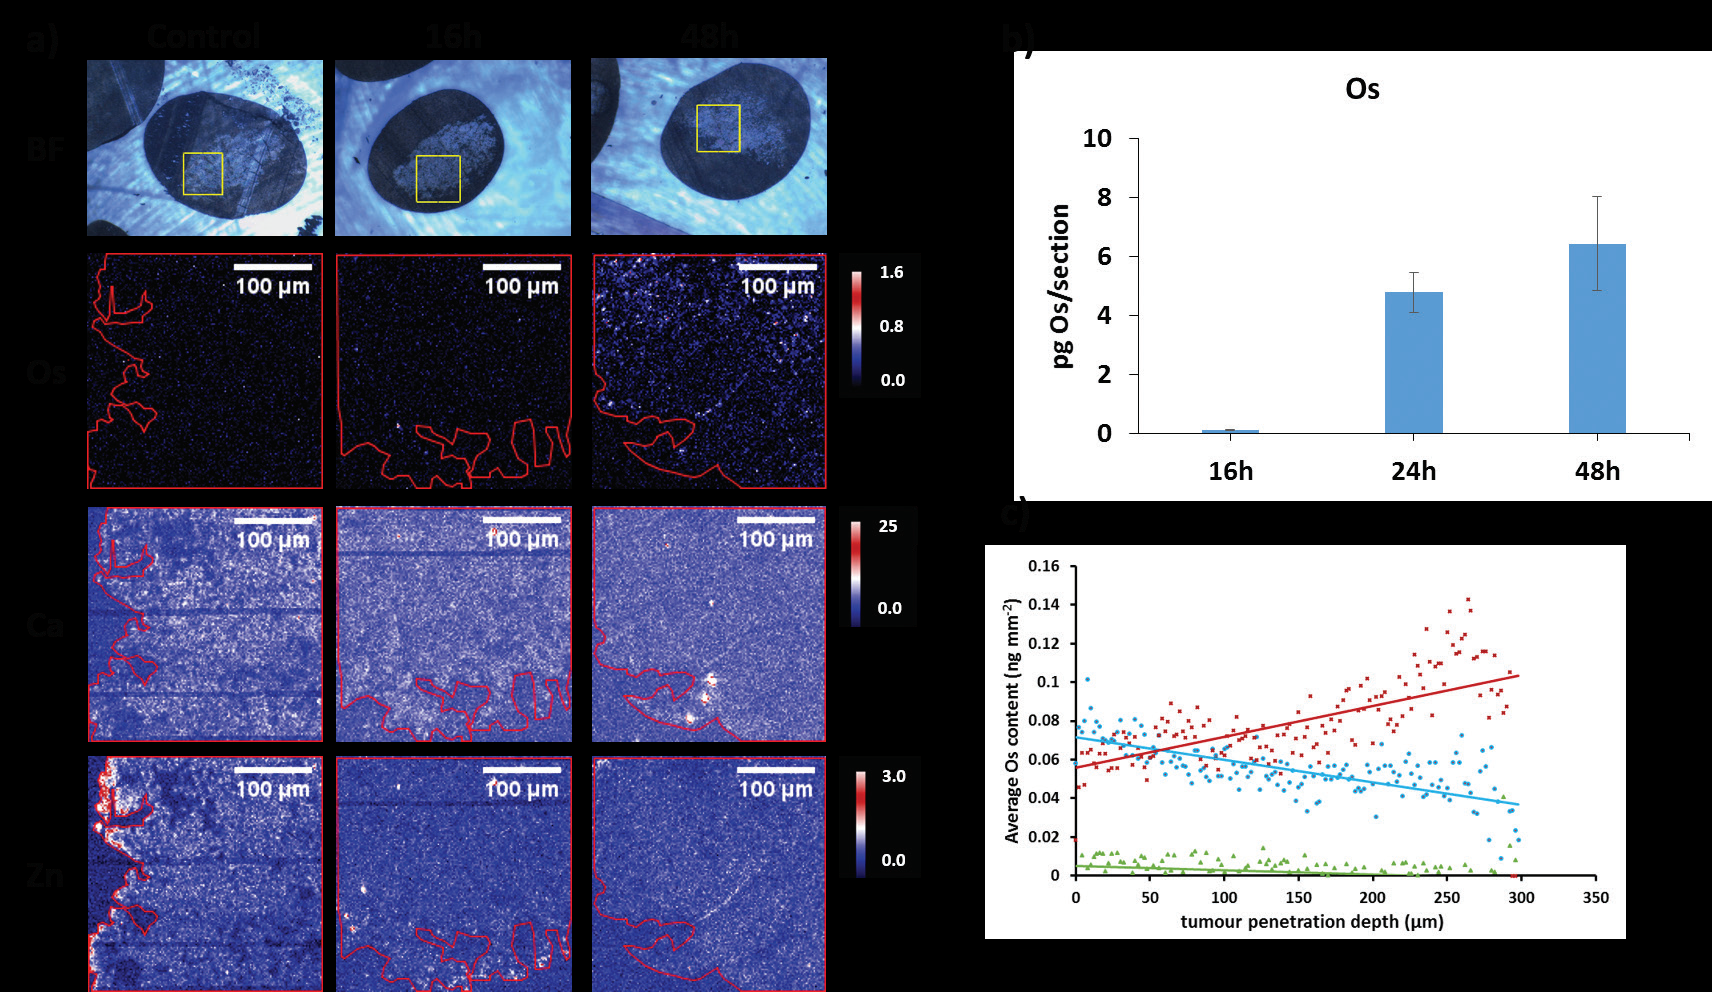 Figure 2: a) Bright field images and XRF elemental maps of Os, Ca and Zn in human ovarian carcinoma spheroid sections treated with organo-osmium anticancer drug FY26 for 0, 16 or 48 h (2x2 μm2
<br/>step size, 1 s dwell time; Scale bar 100 μm; Calibration bar ng mm-2). Yellow squares indicate areas of the spheroid studied using XRF. Red areas indicate limits of the spheroids. b) Total Os content (pg/
<br/>section), and c) Average Os content (ng mm-2) as a function of distance from spheroid surface, after treatment for 16 h (green), 24 h (blue) or 48 h (red) with the drug.